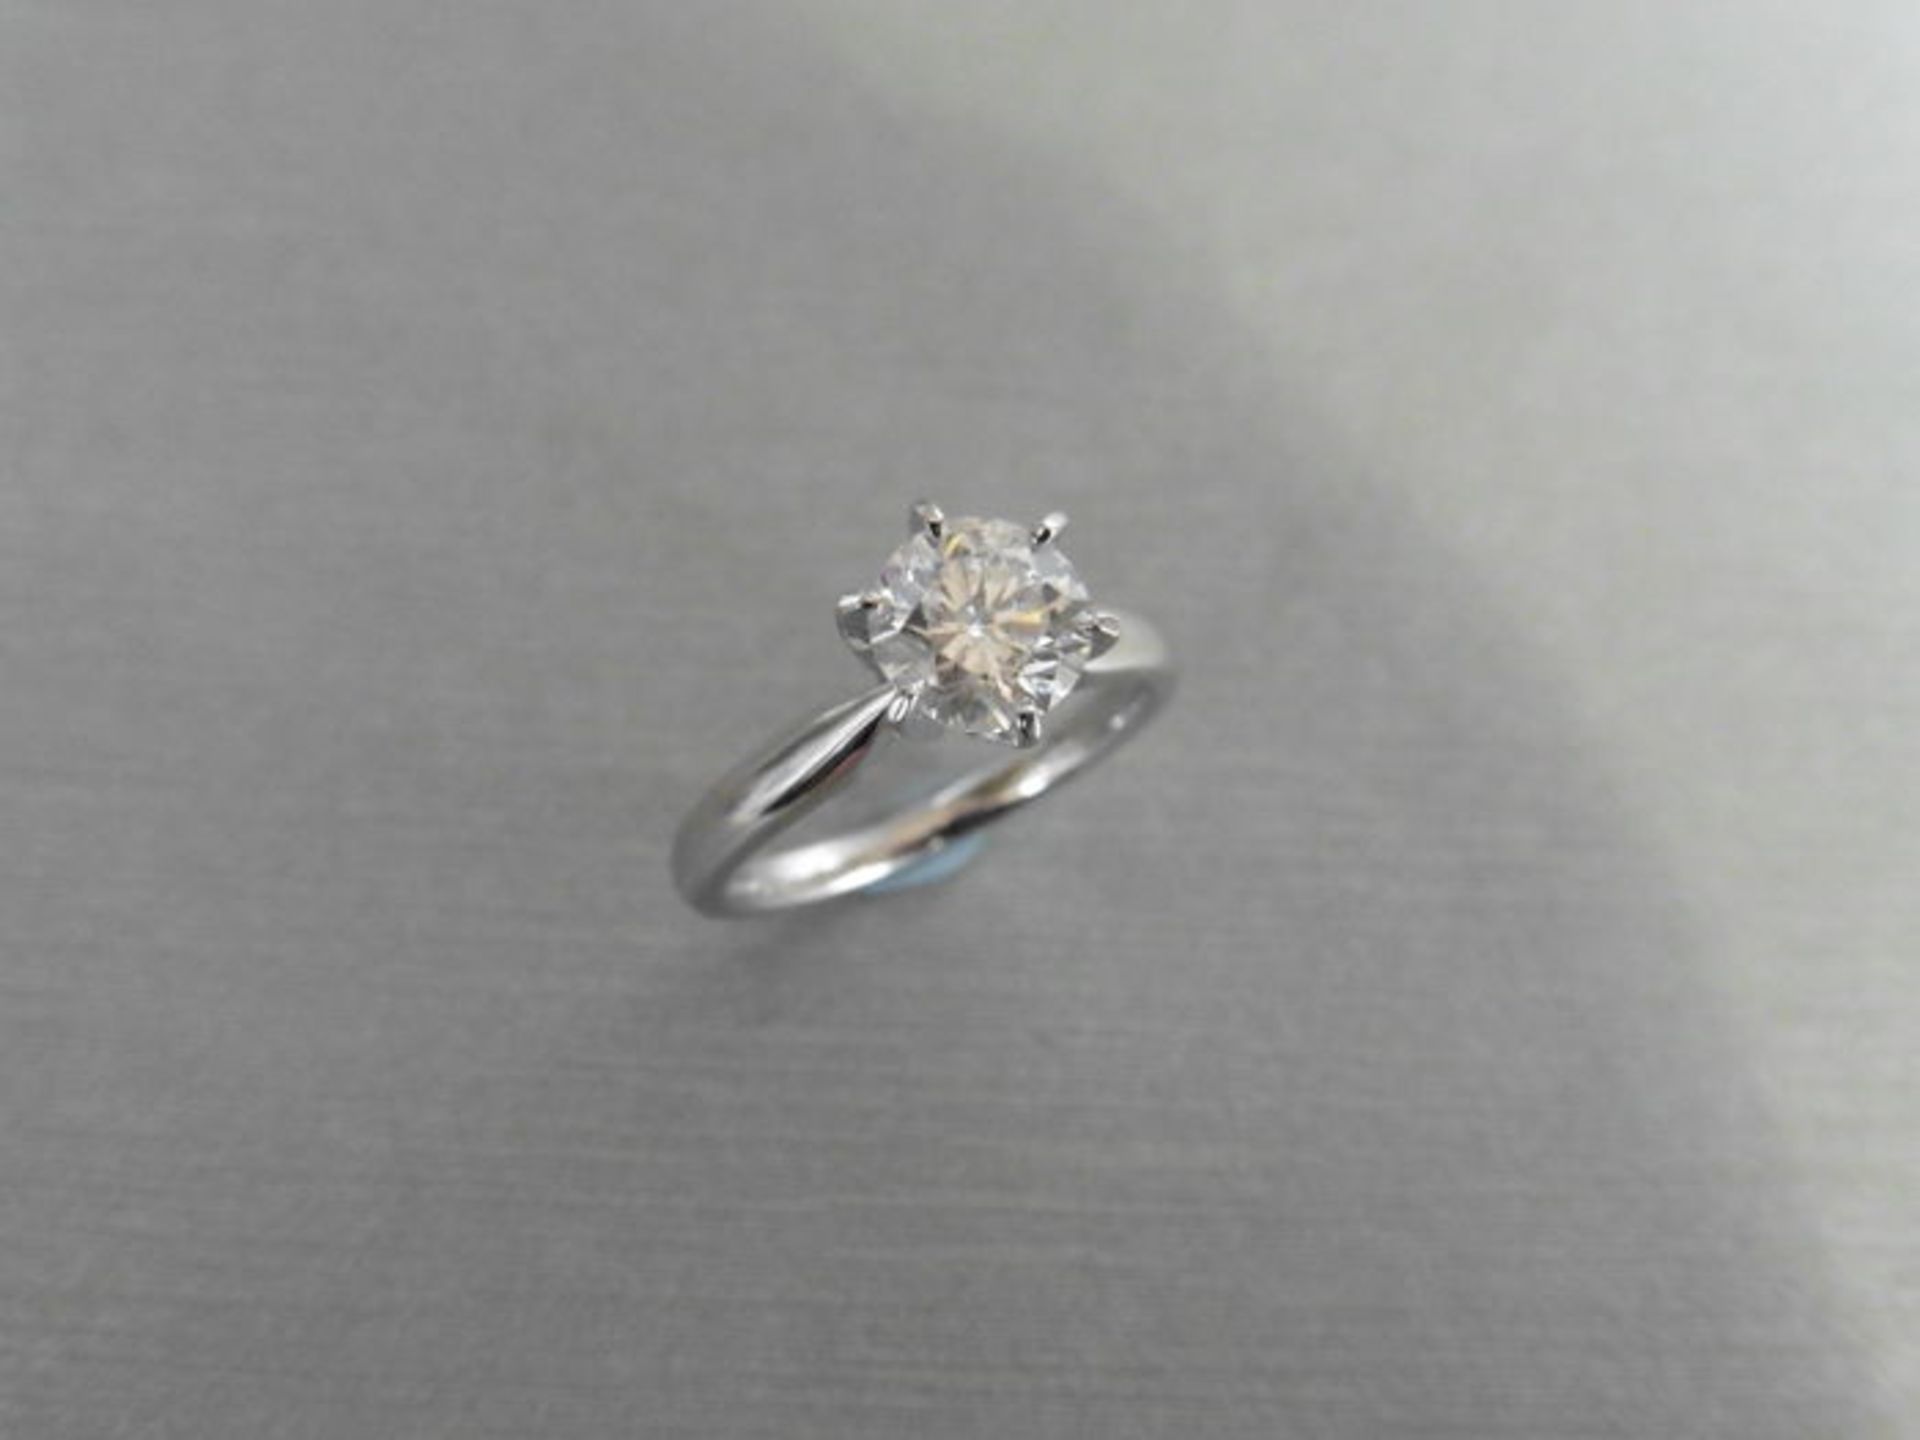 1.16ct Diamond solitaire ring with a brilliant cut diamond, H colour and si3 clarity. Set in